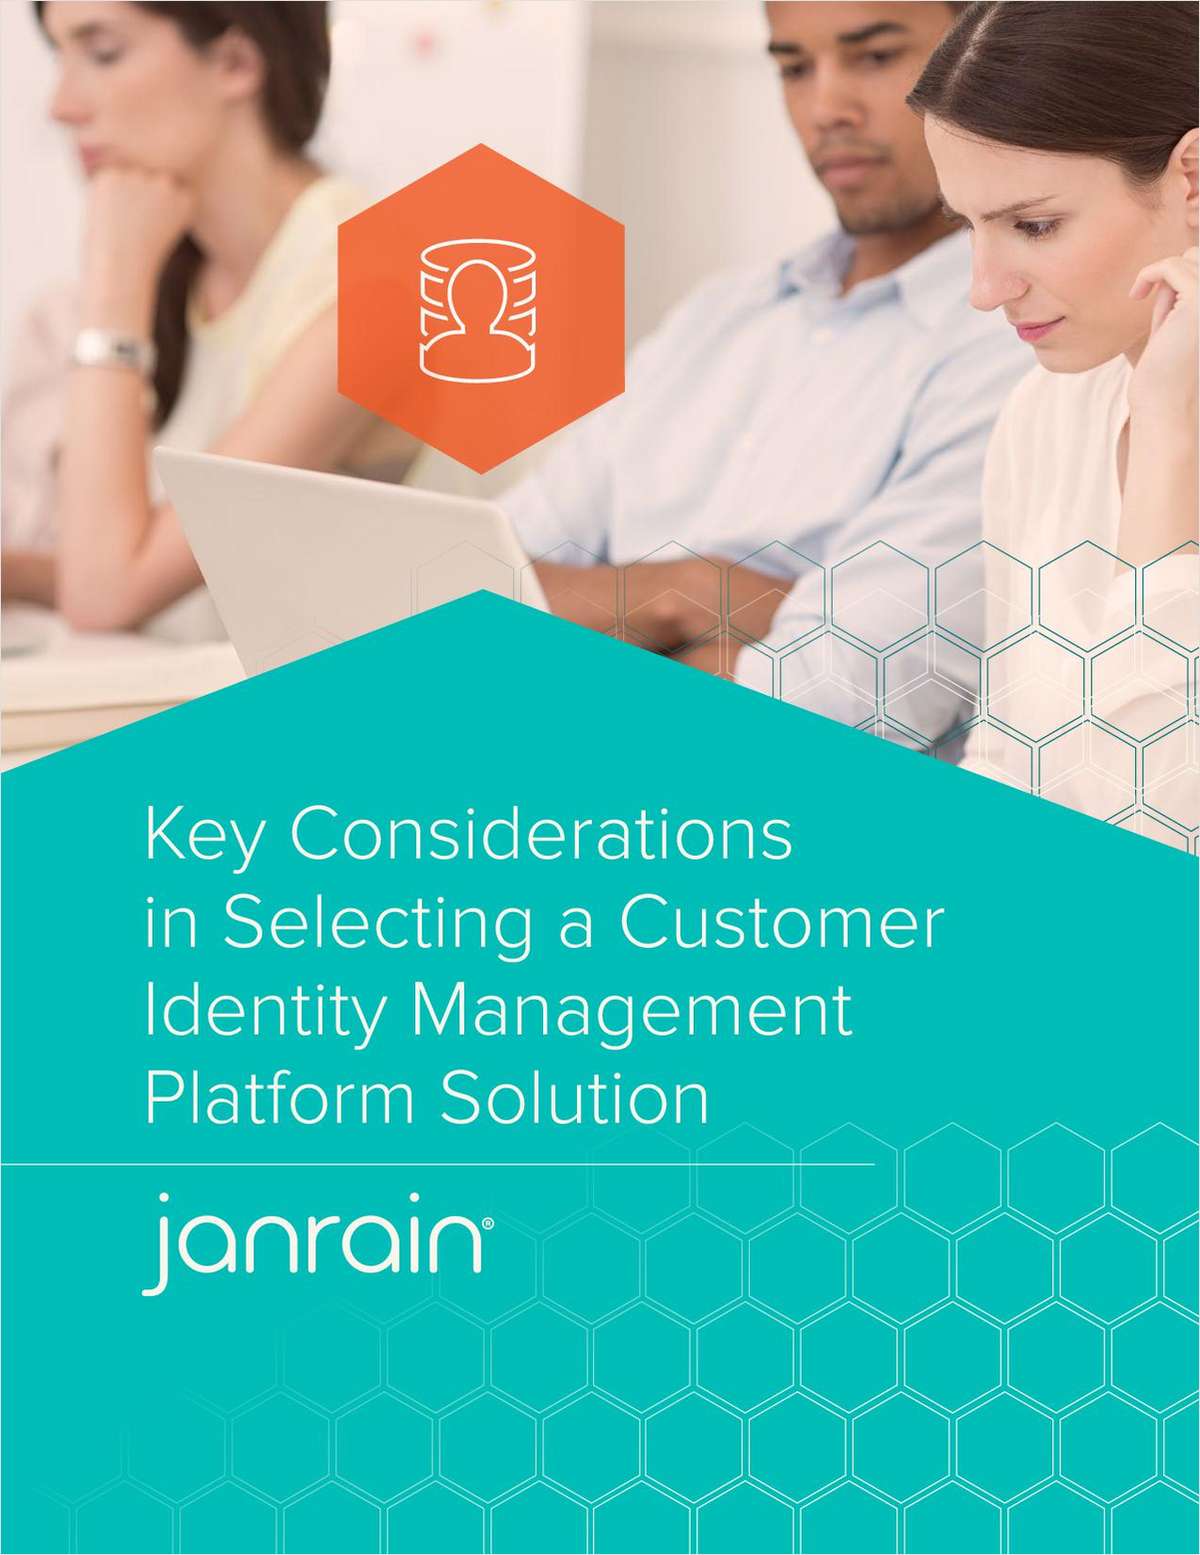 Key Considerations in Selecting a Customer Identity Management Platform Solution